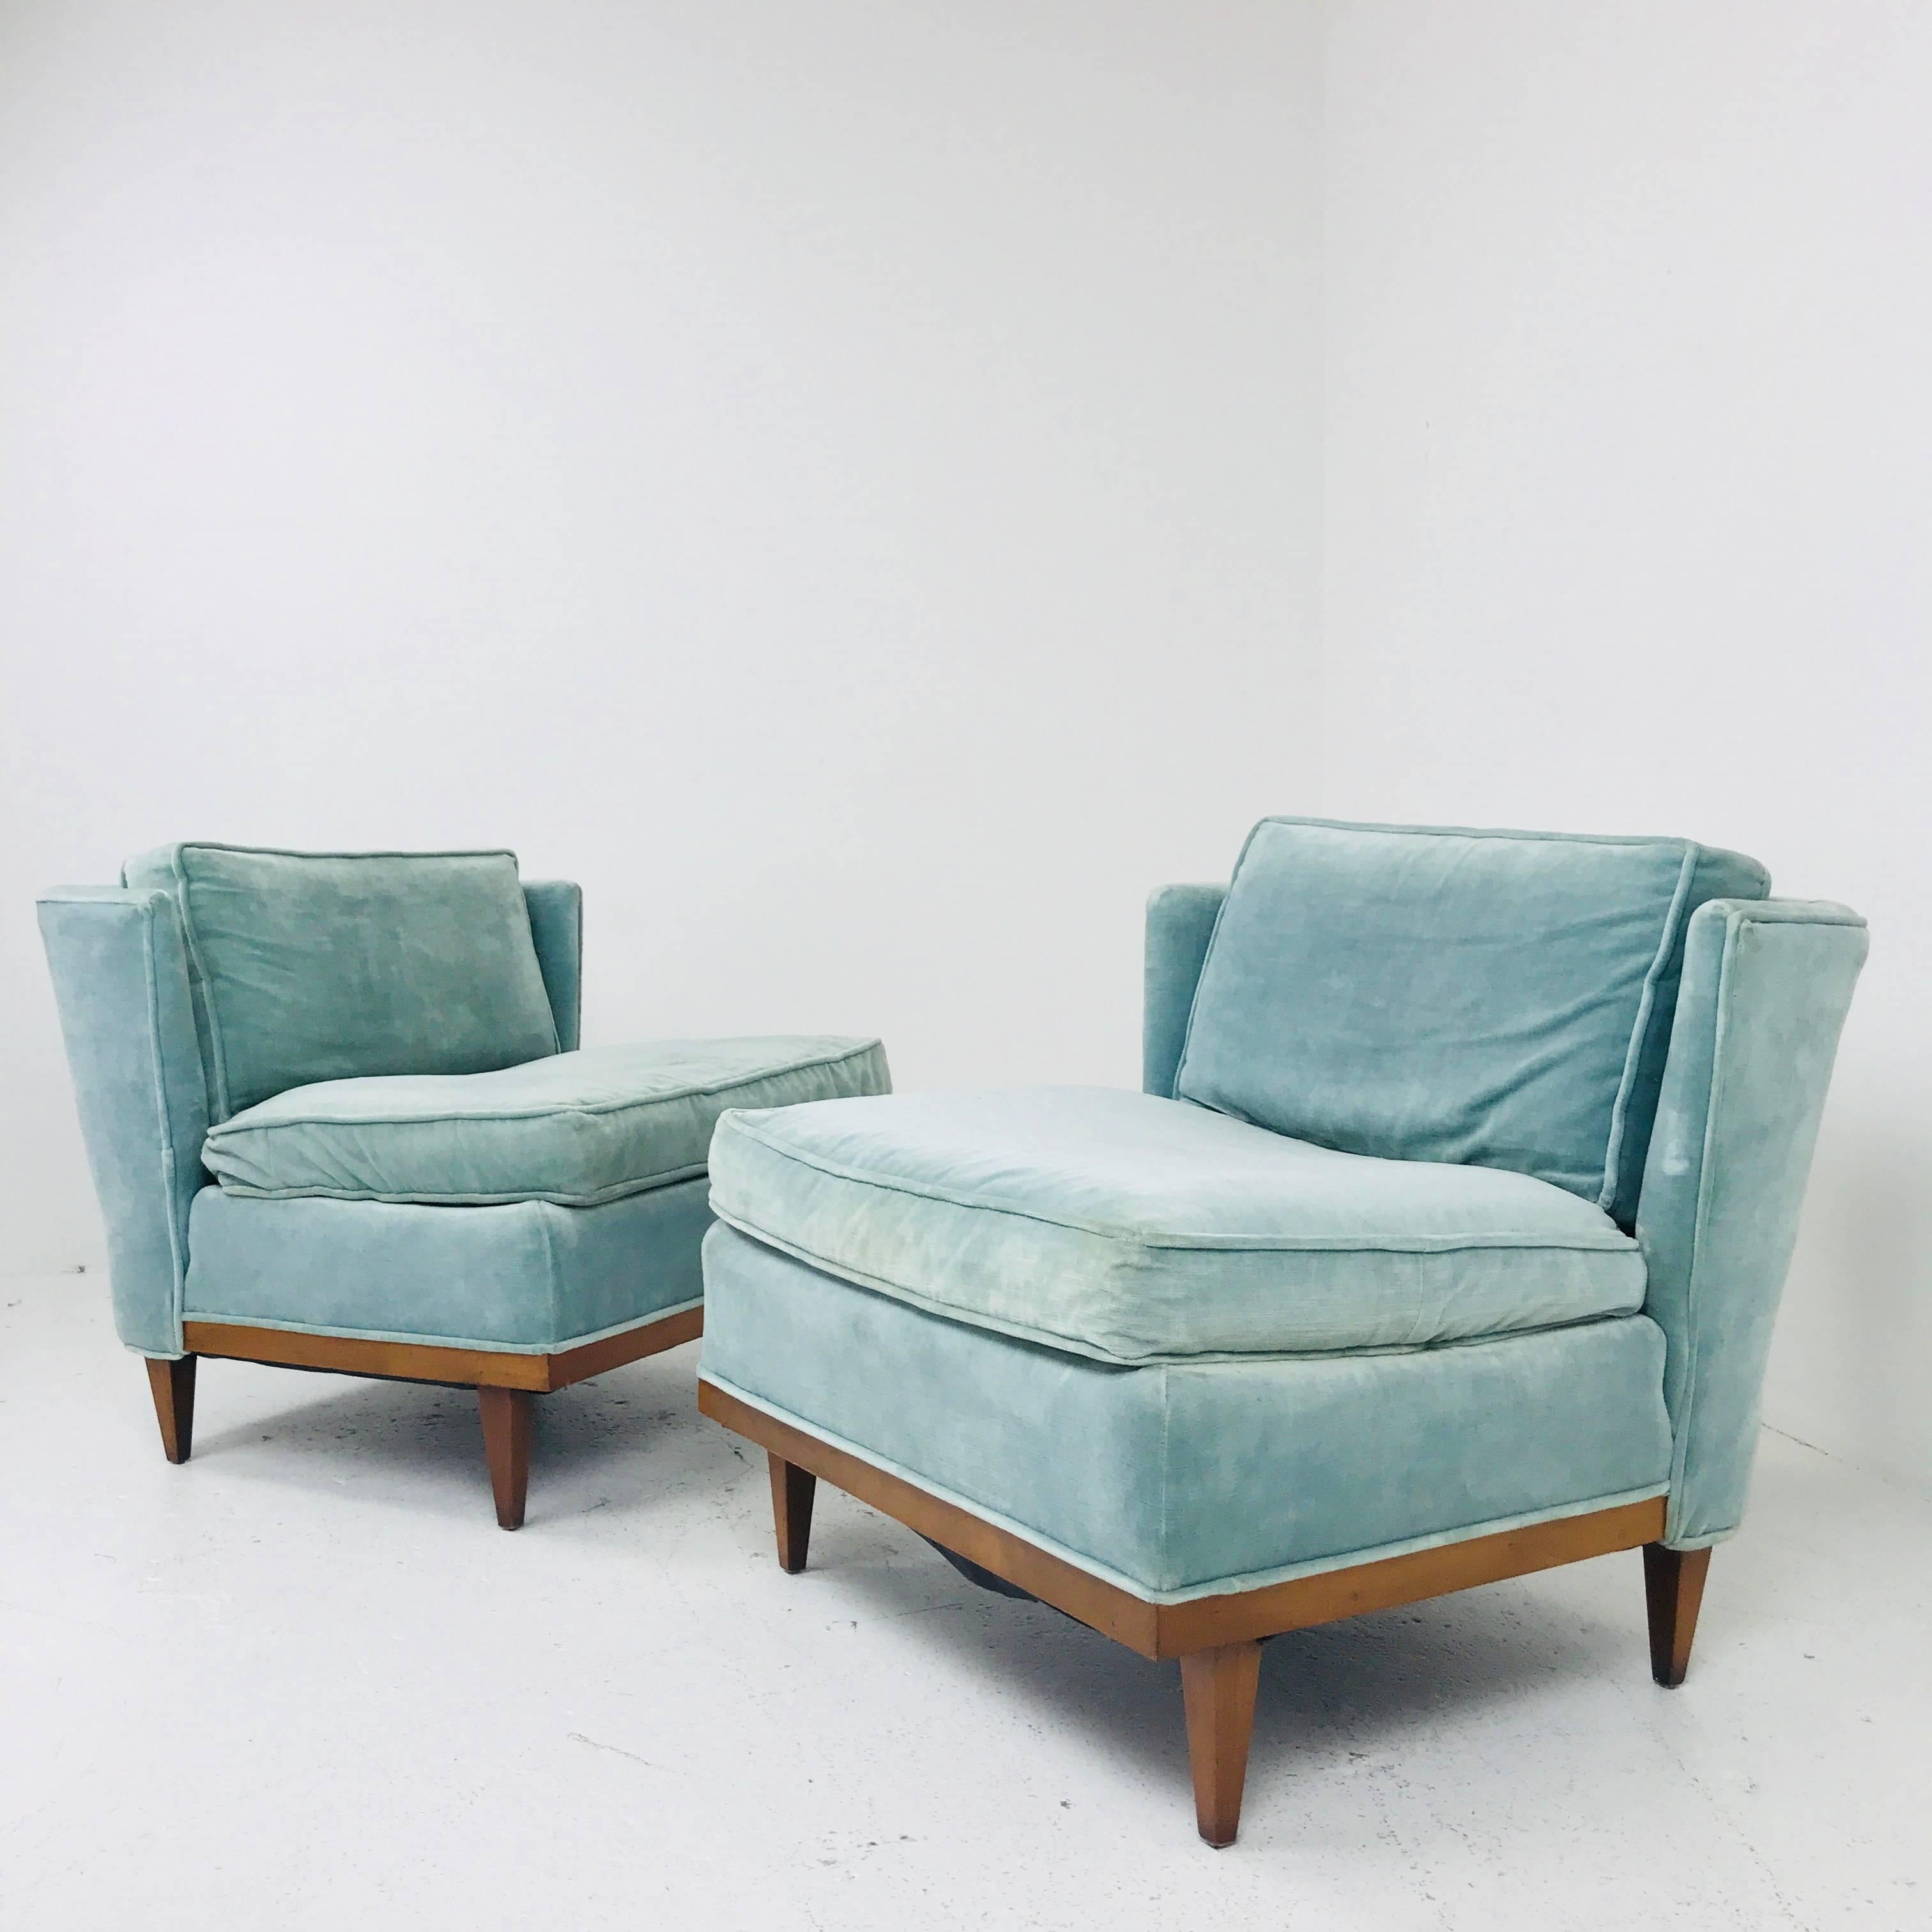 Pair of light blue mid-century velvet slipper wingback chairs. Chairs are in good vintage condition and need new upholstery and refinishing.

Dimensions: 30